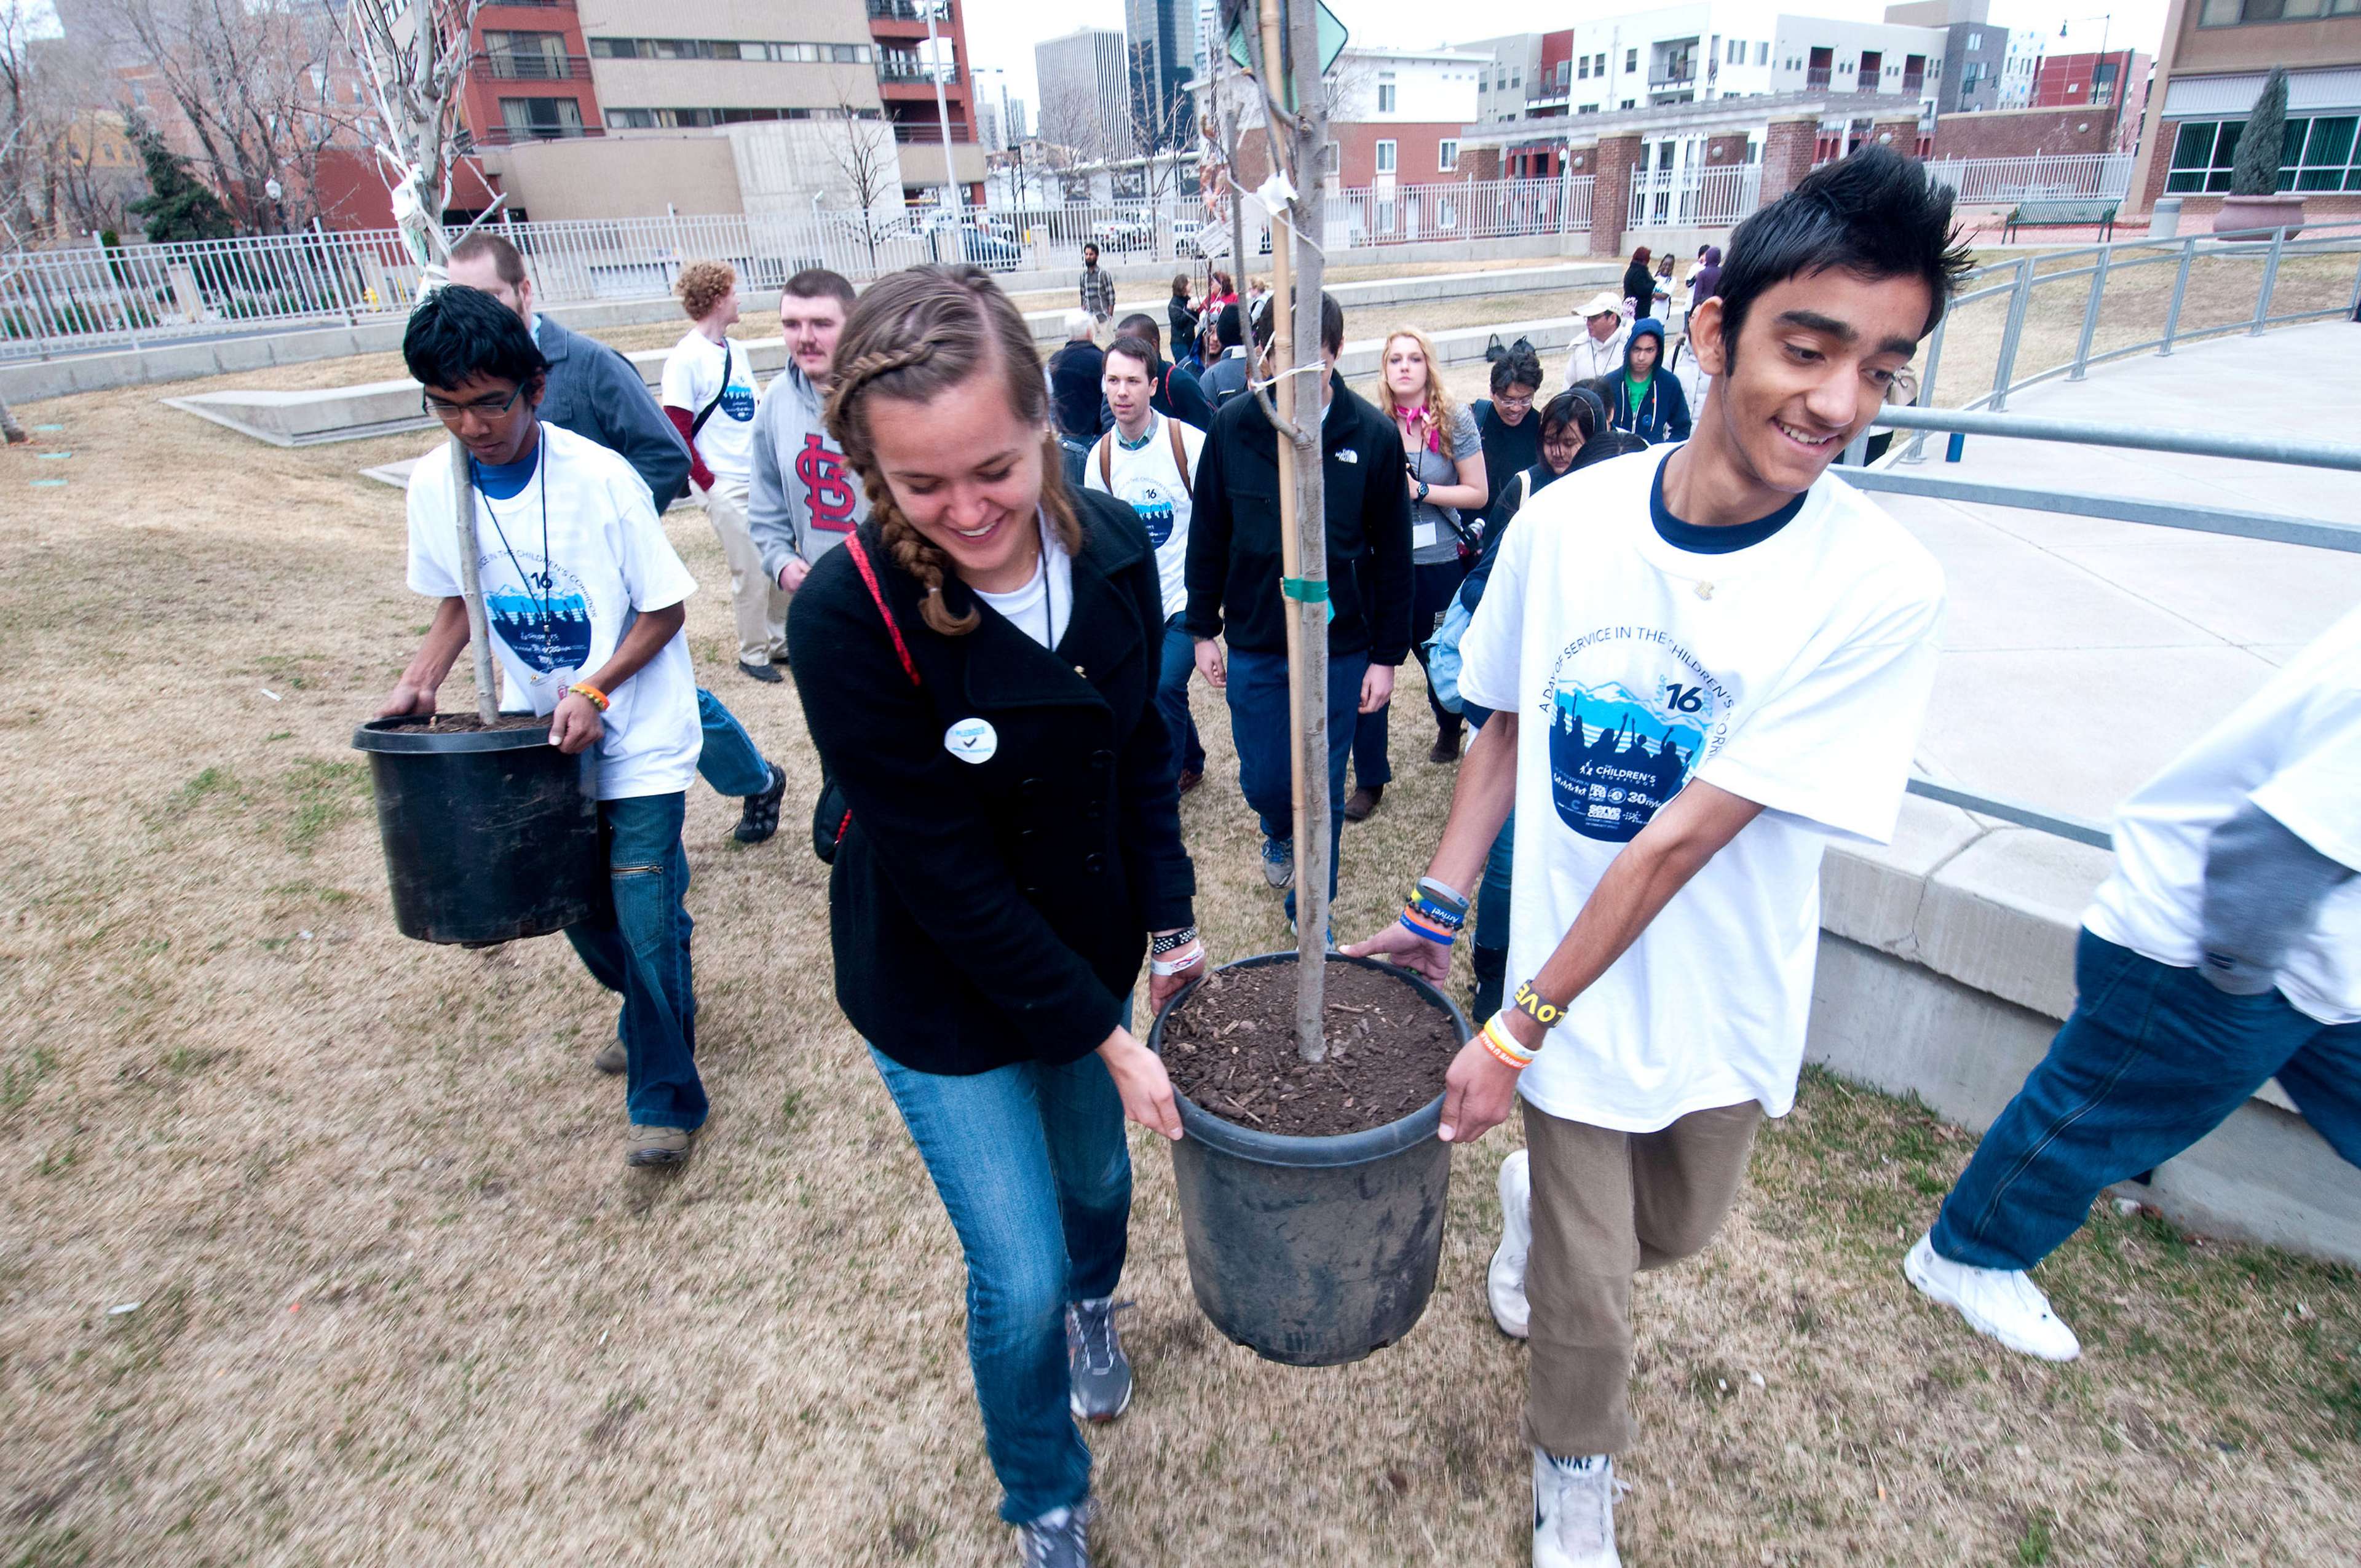 A young man and woman work together to carry a sapling in a bucket in an outdoor, urban greenspace; other young people carrying saplings follow behind.